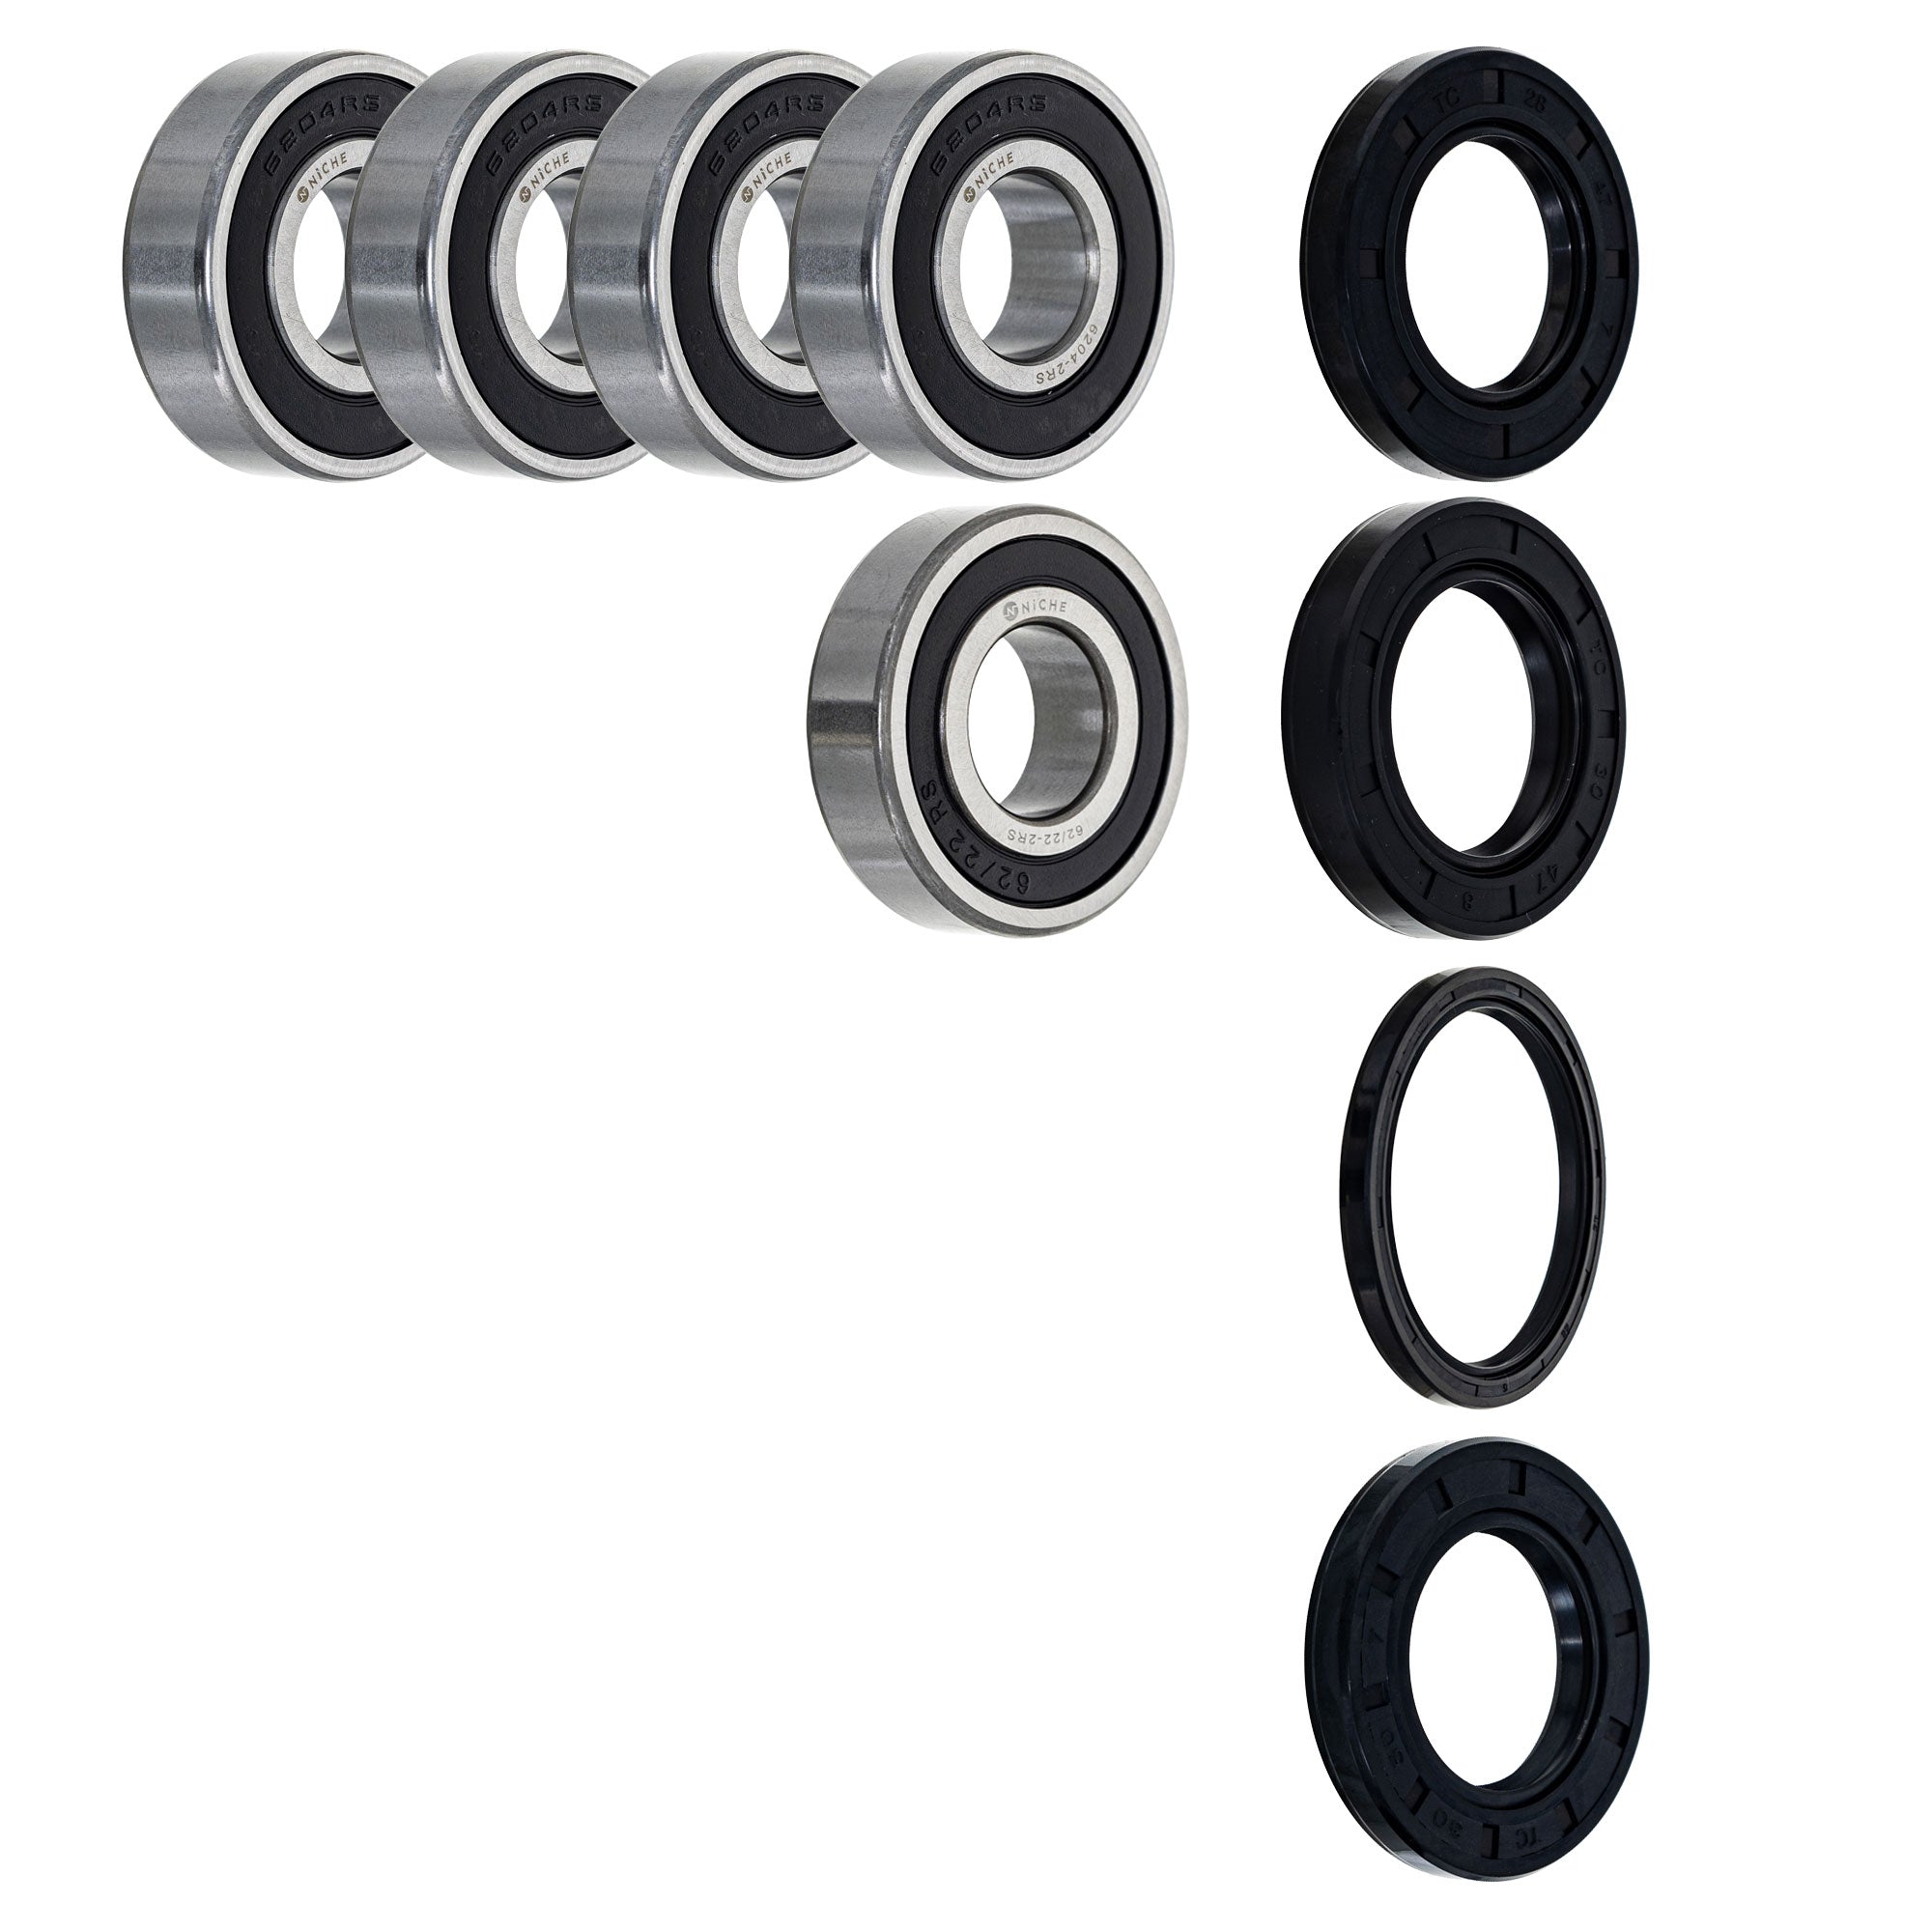 Wheel Bearing Seal Kit for zOTHER Ref No Shadow NICHE MK1008516